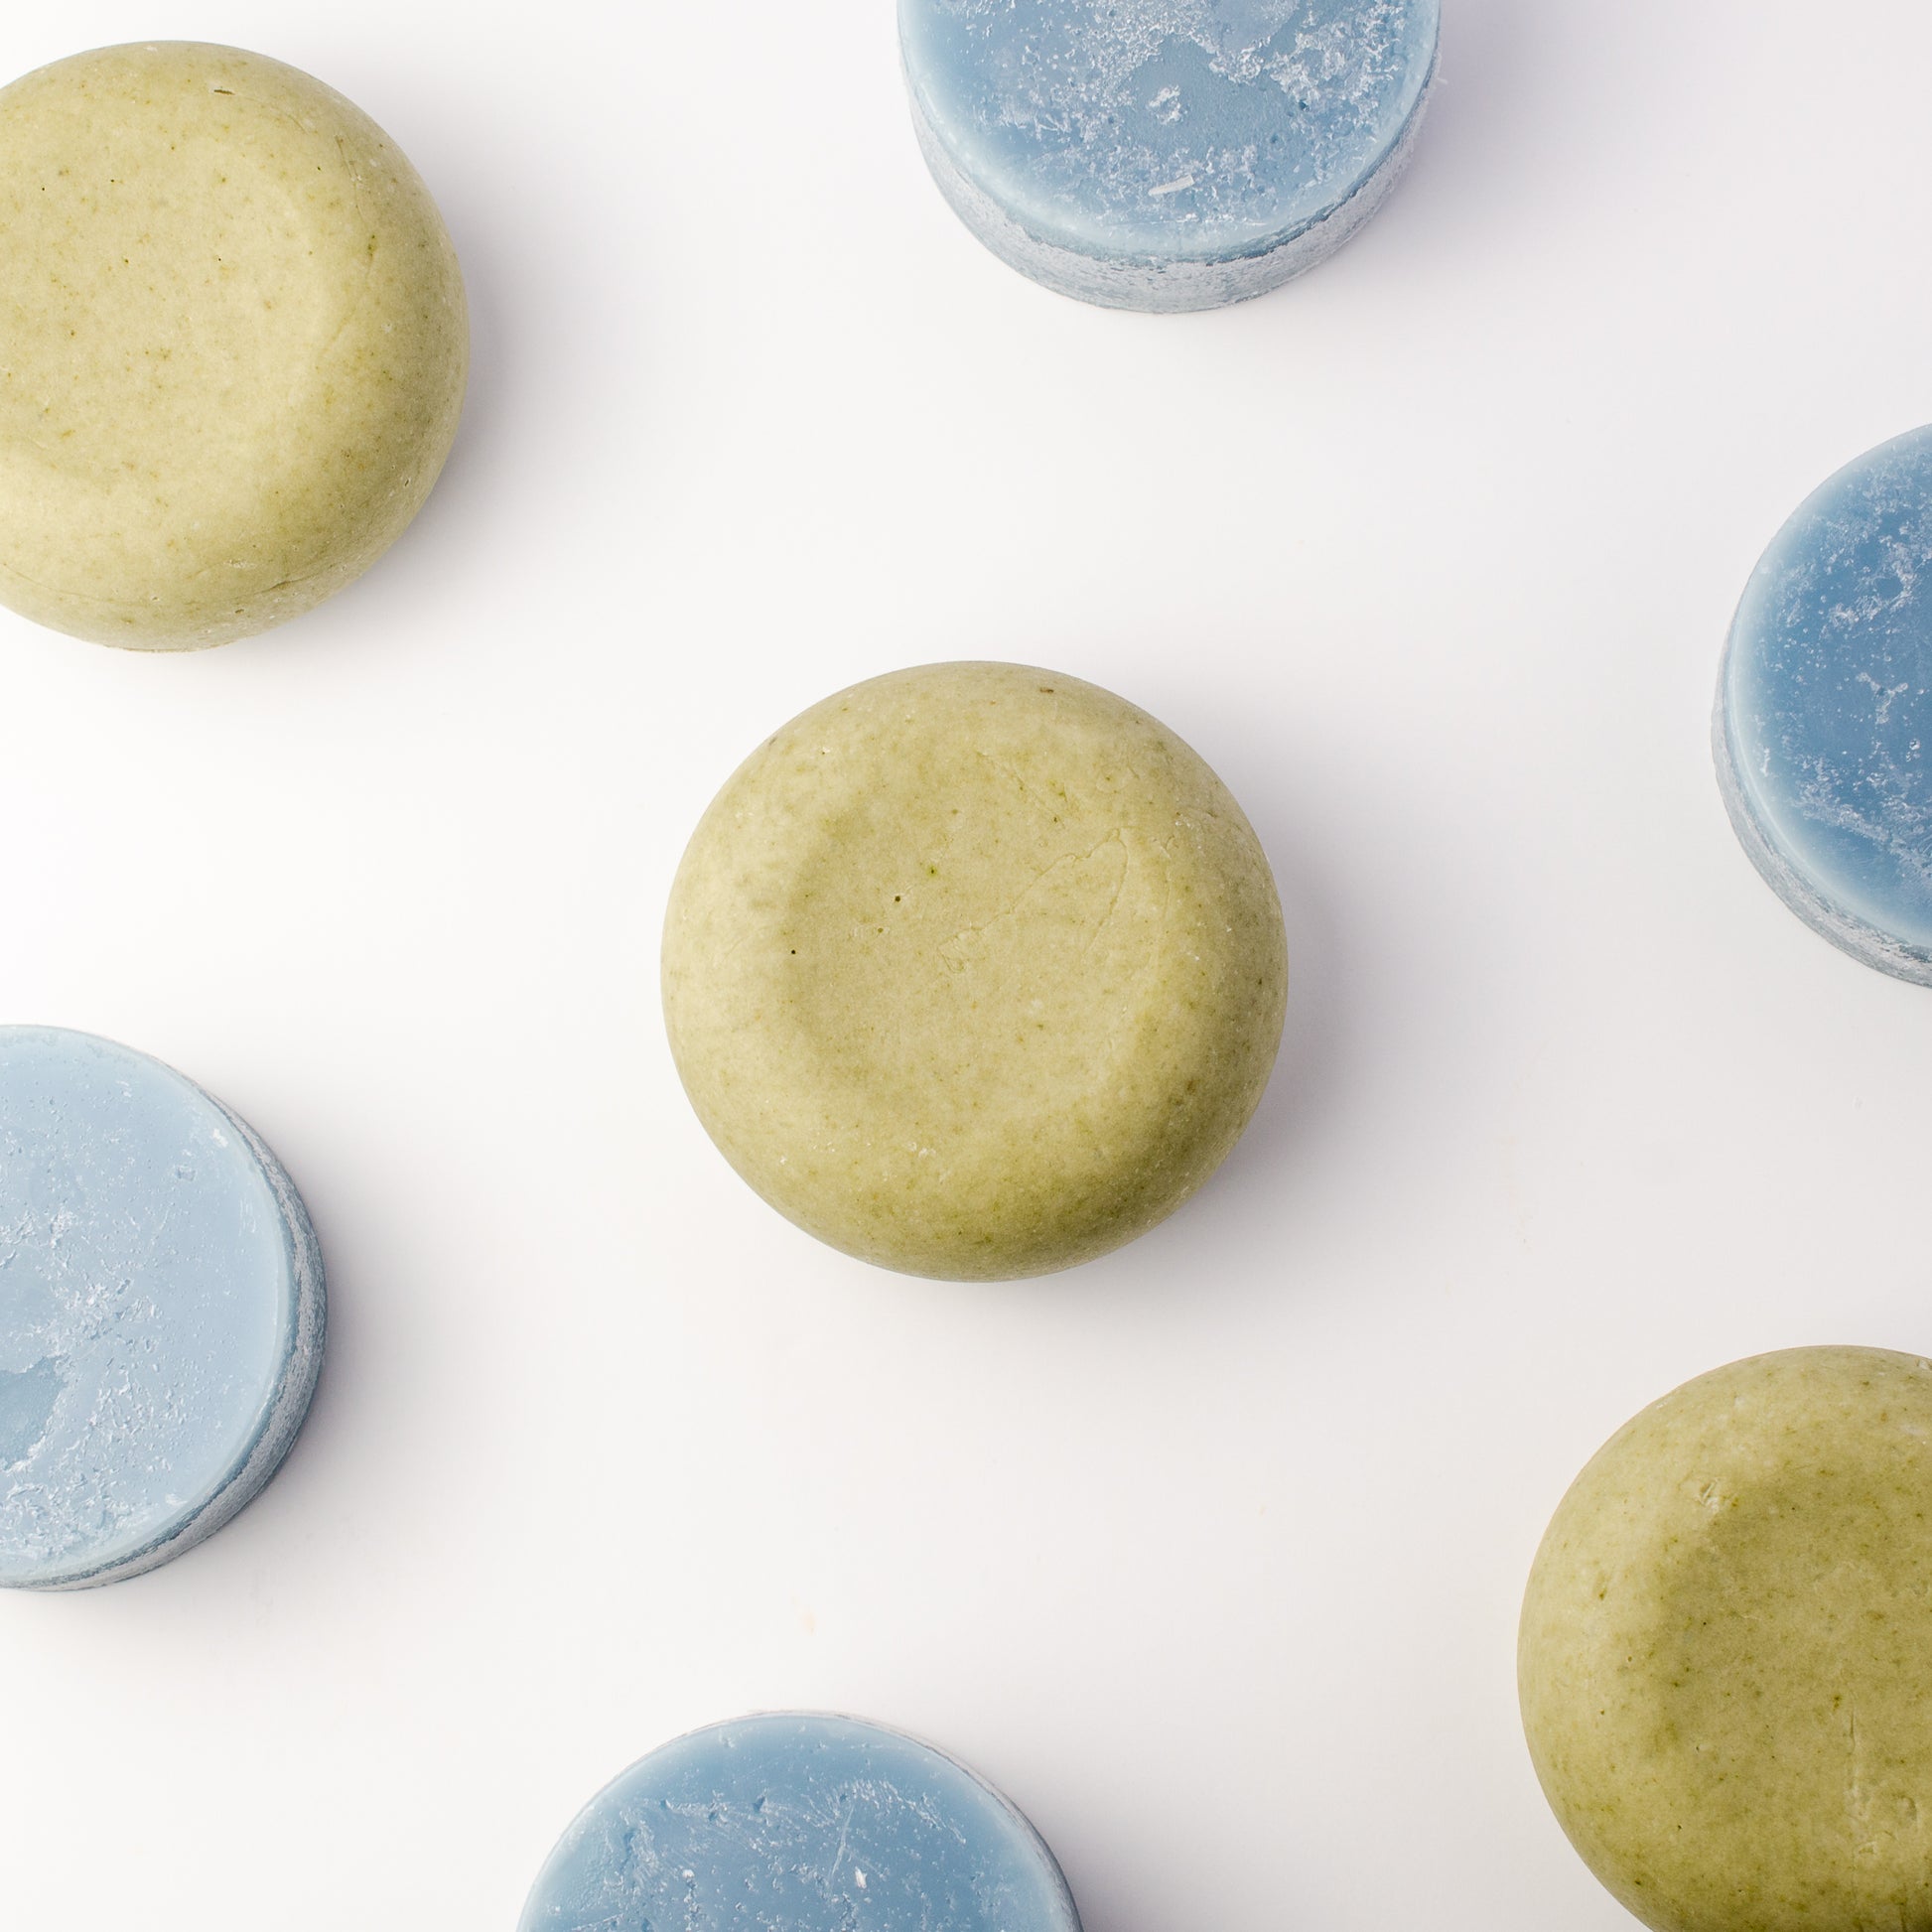 nettle rosemary mint shampoo bar with conditioner bars